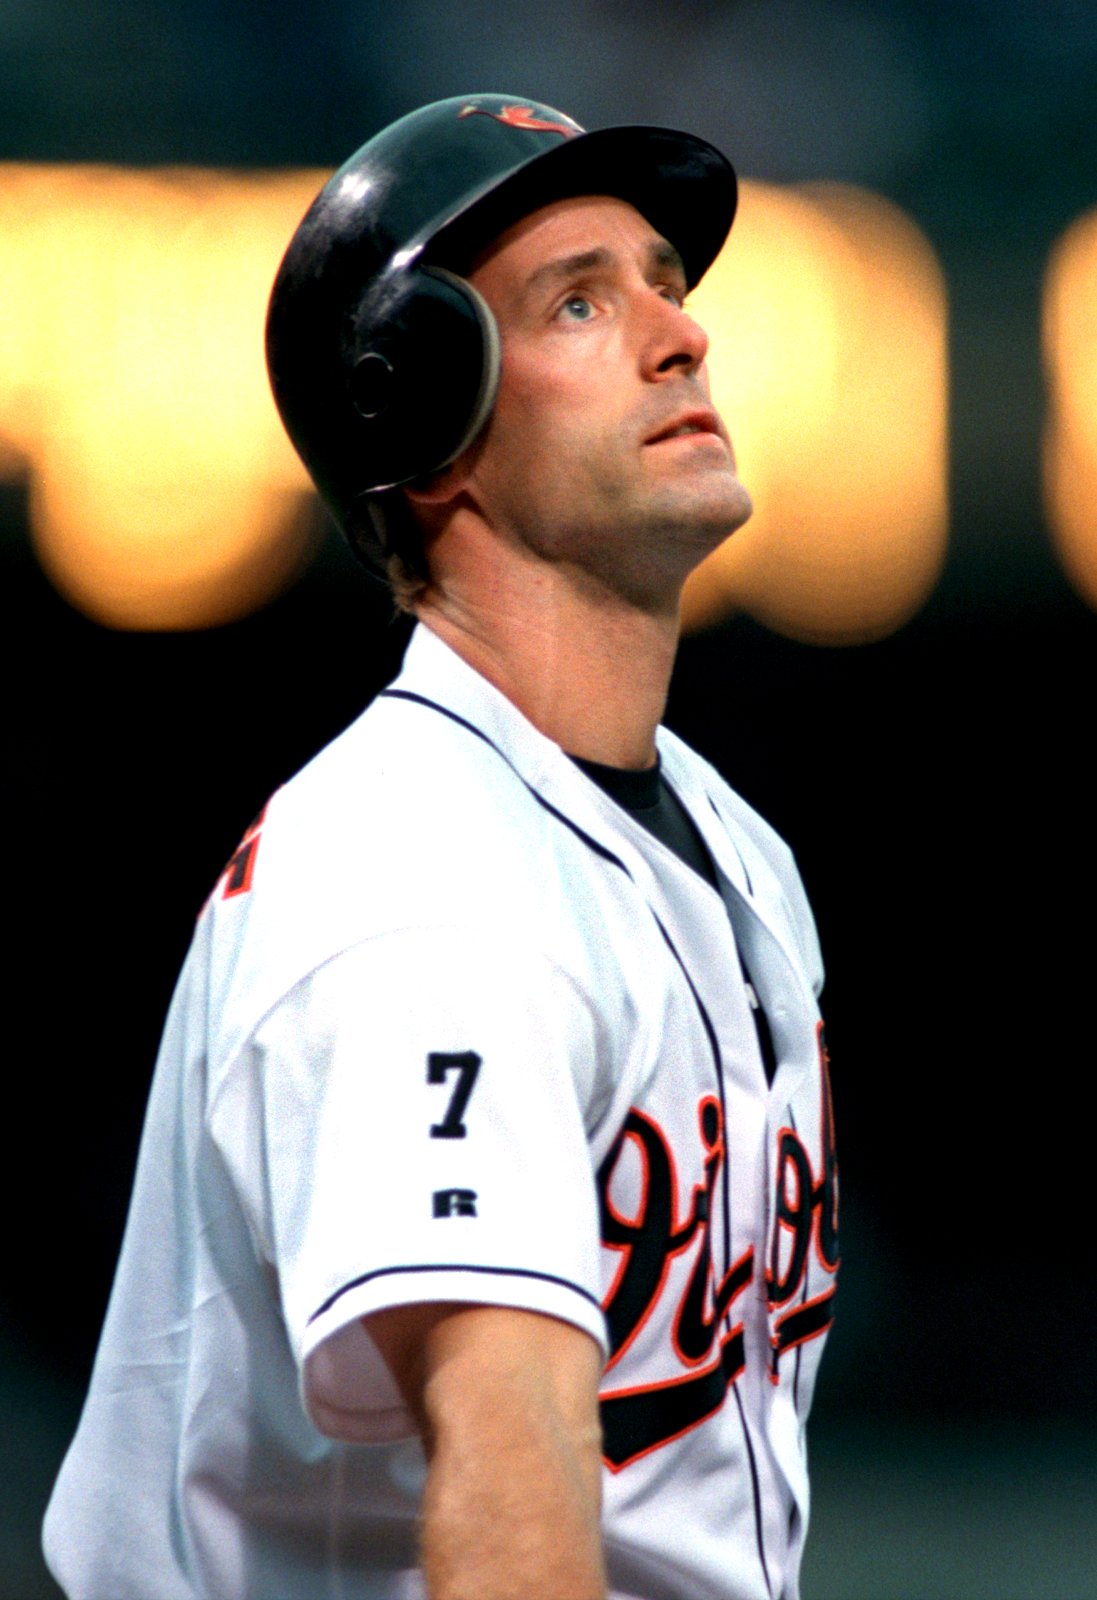 CAMDEN YARDS--May 19, 1999--Orioles' #17, B.J. Surhoff, in a game against the California Angels. Photo by John Makely/staff (scanned 6/8/99)